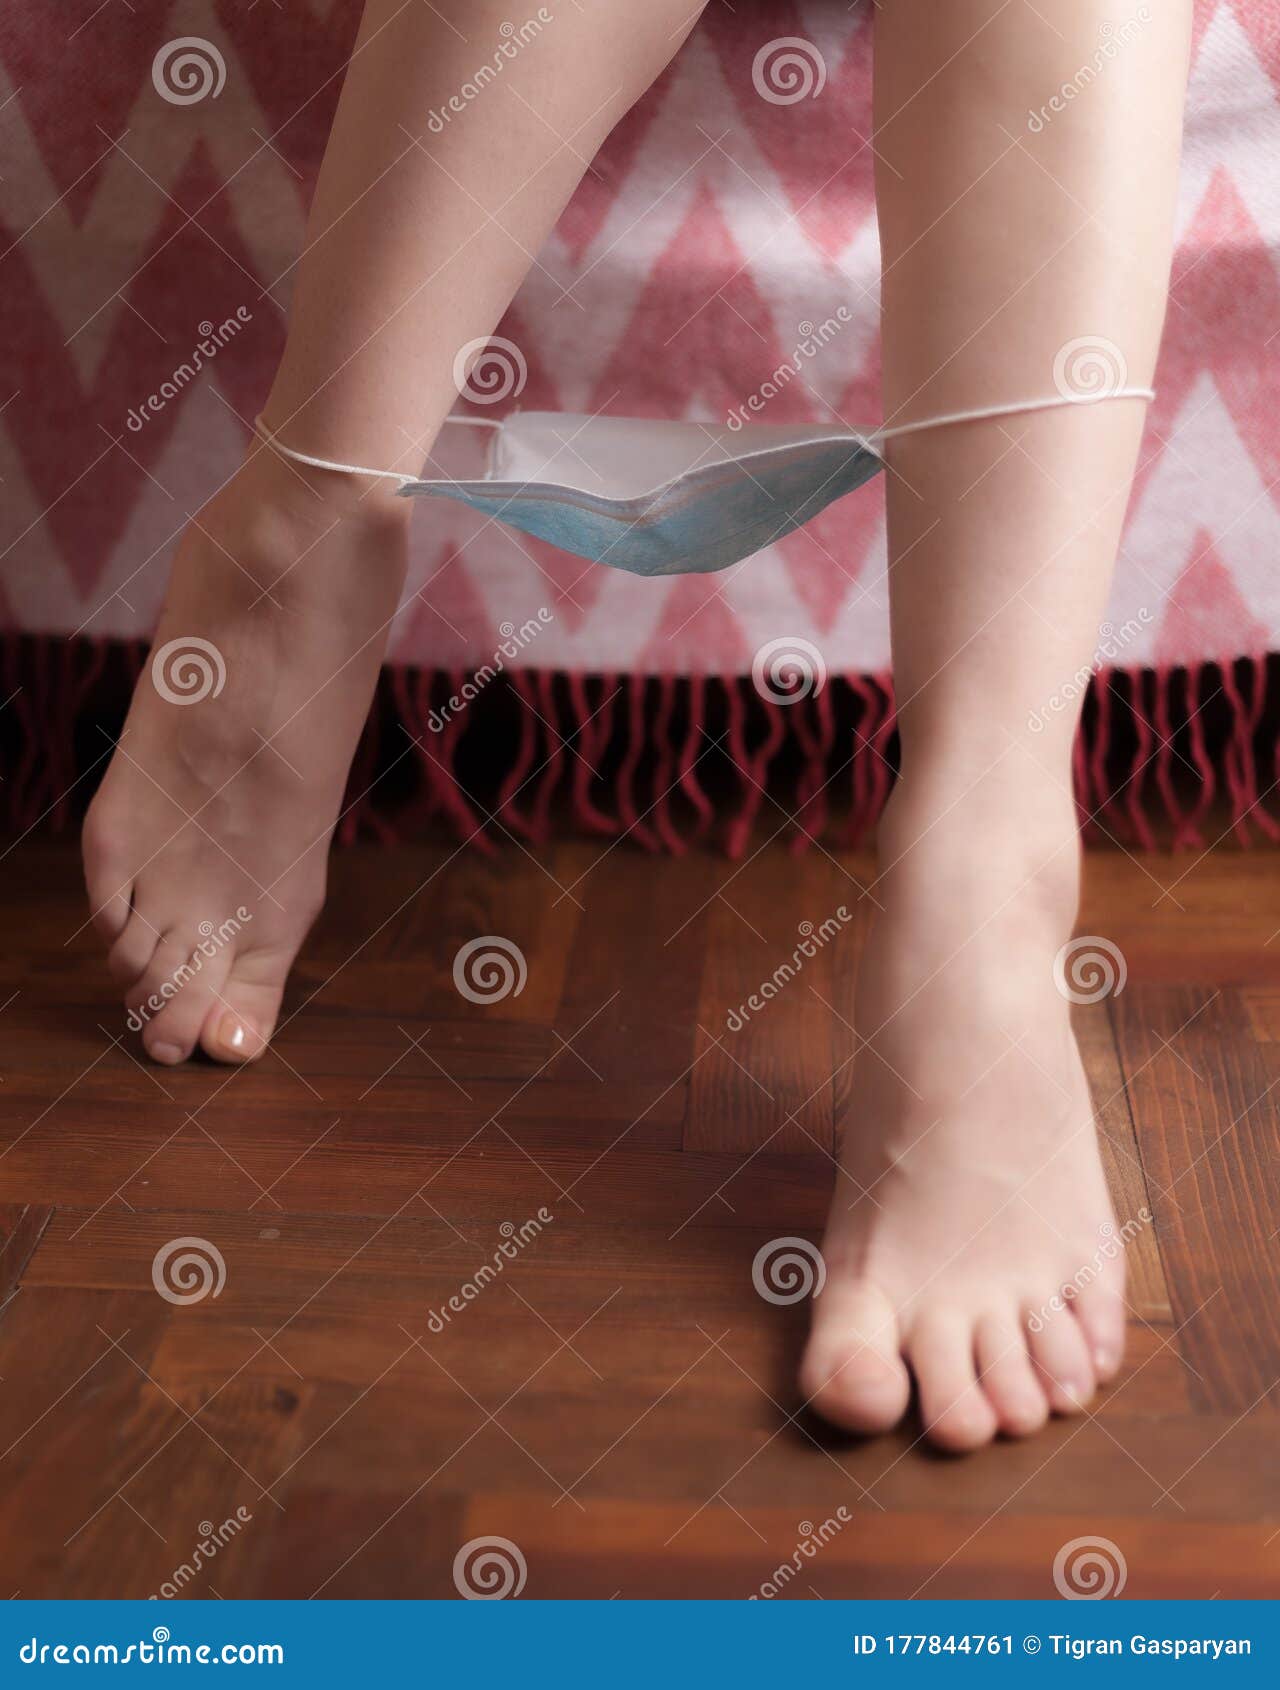 Female Legs Take Off Panties in the Form of a Medical Mask. Safe Sex Concept.  Security during the Quarantine of COVID-19 Stock Image - Image of passion,  mask: 177844761